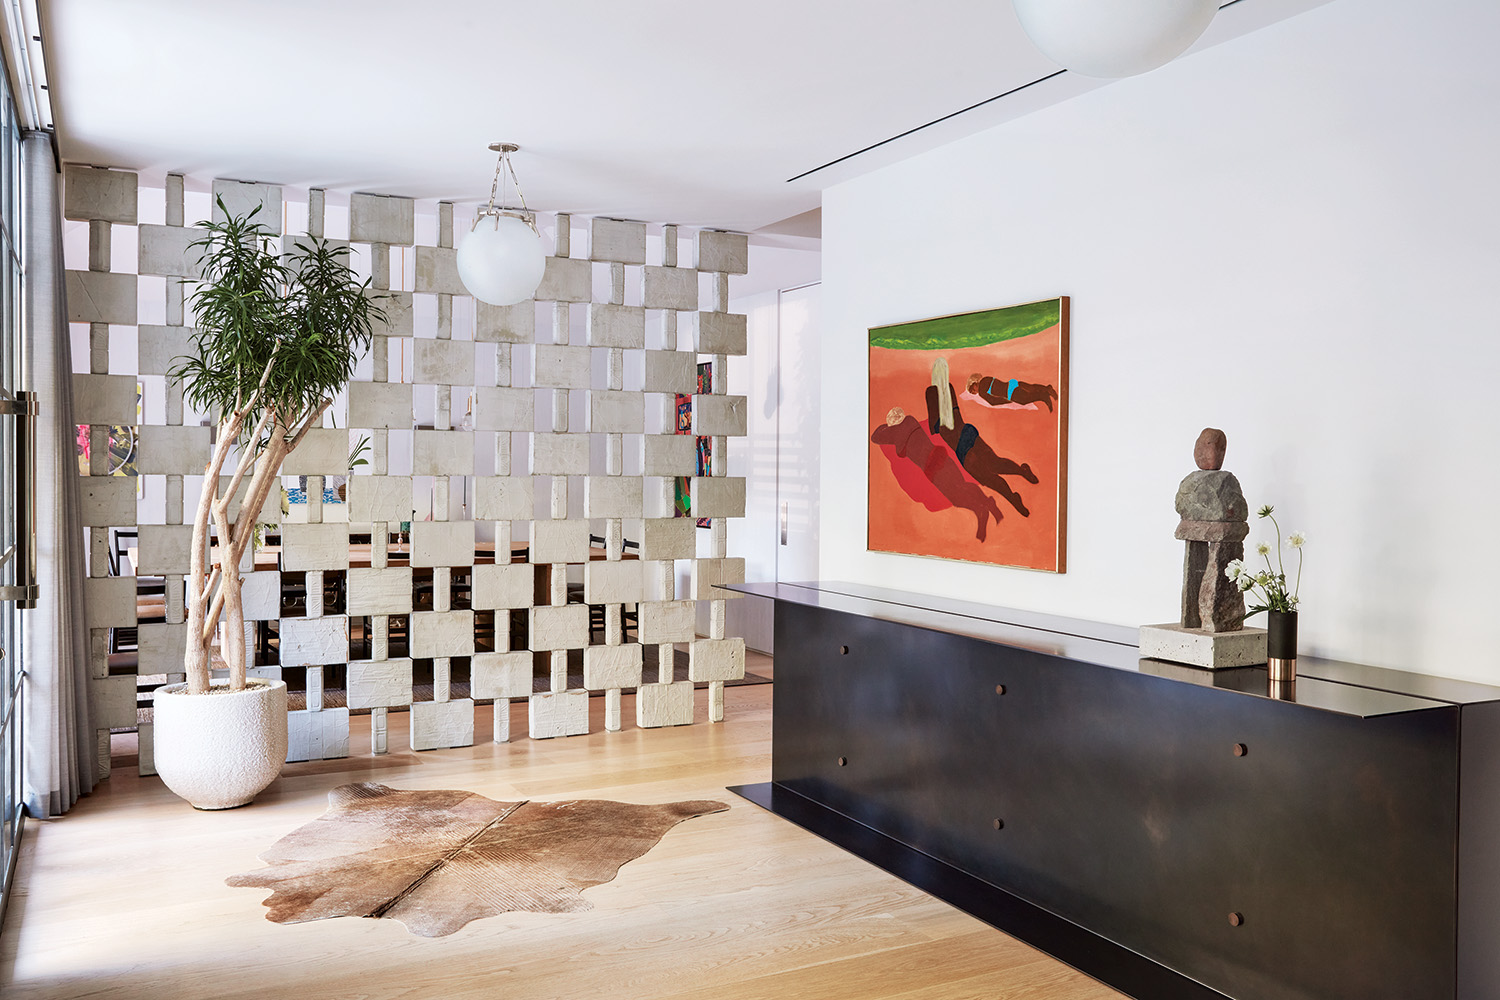 Entry featuring a painting by March Avery, and a custom-made steel cabinet that hosts an Ugo Rondinone sculpture